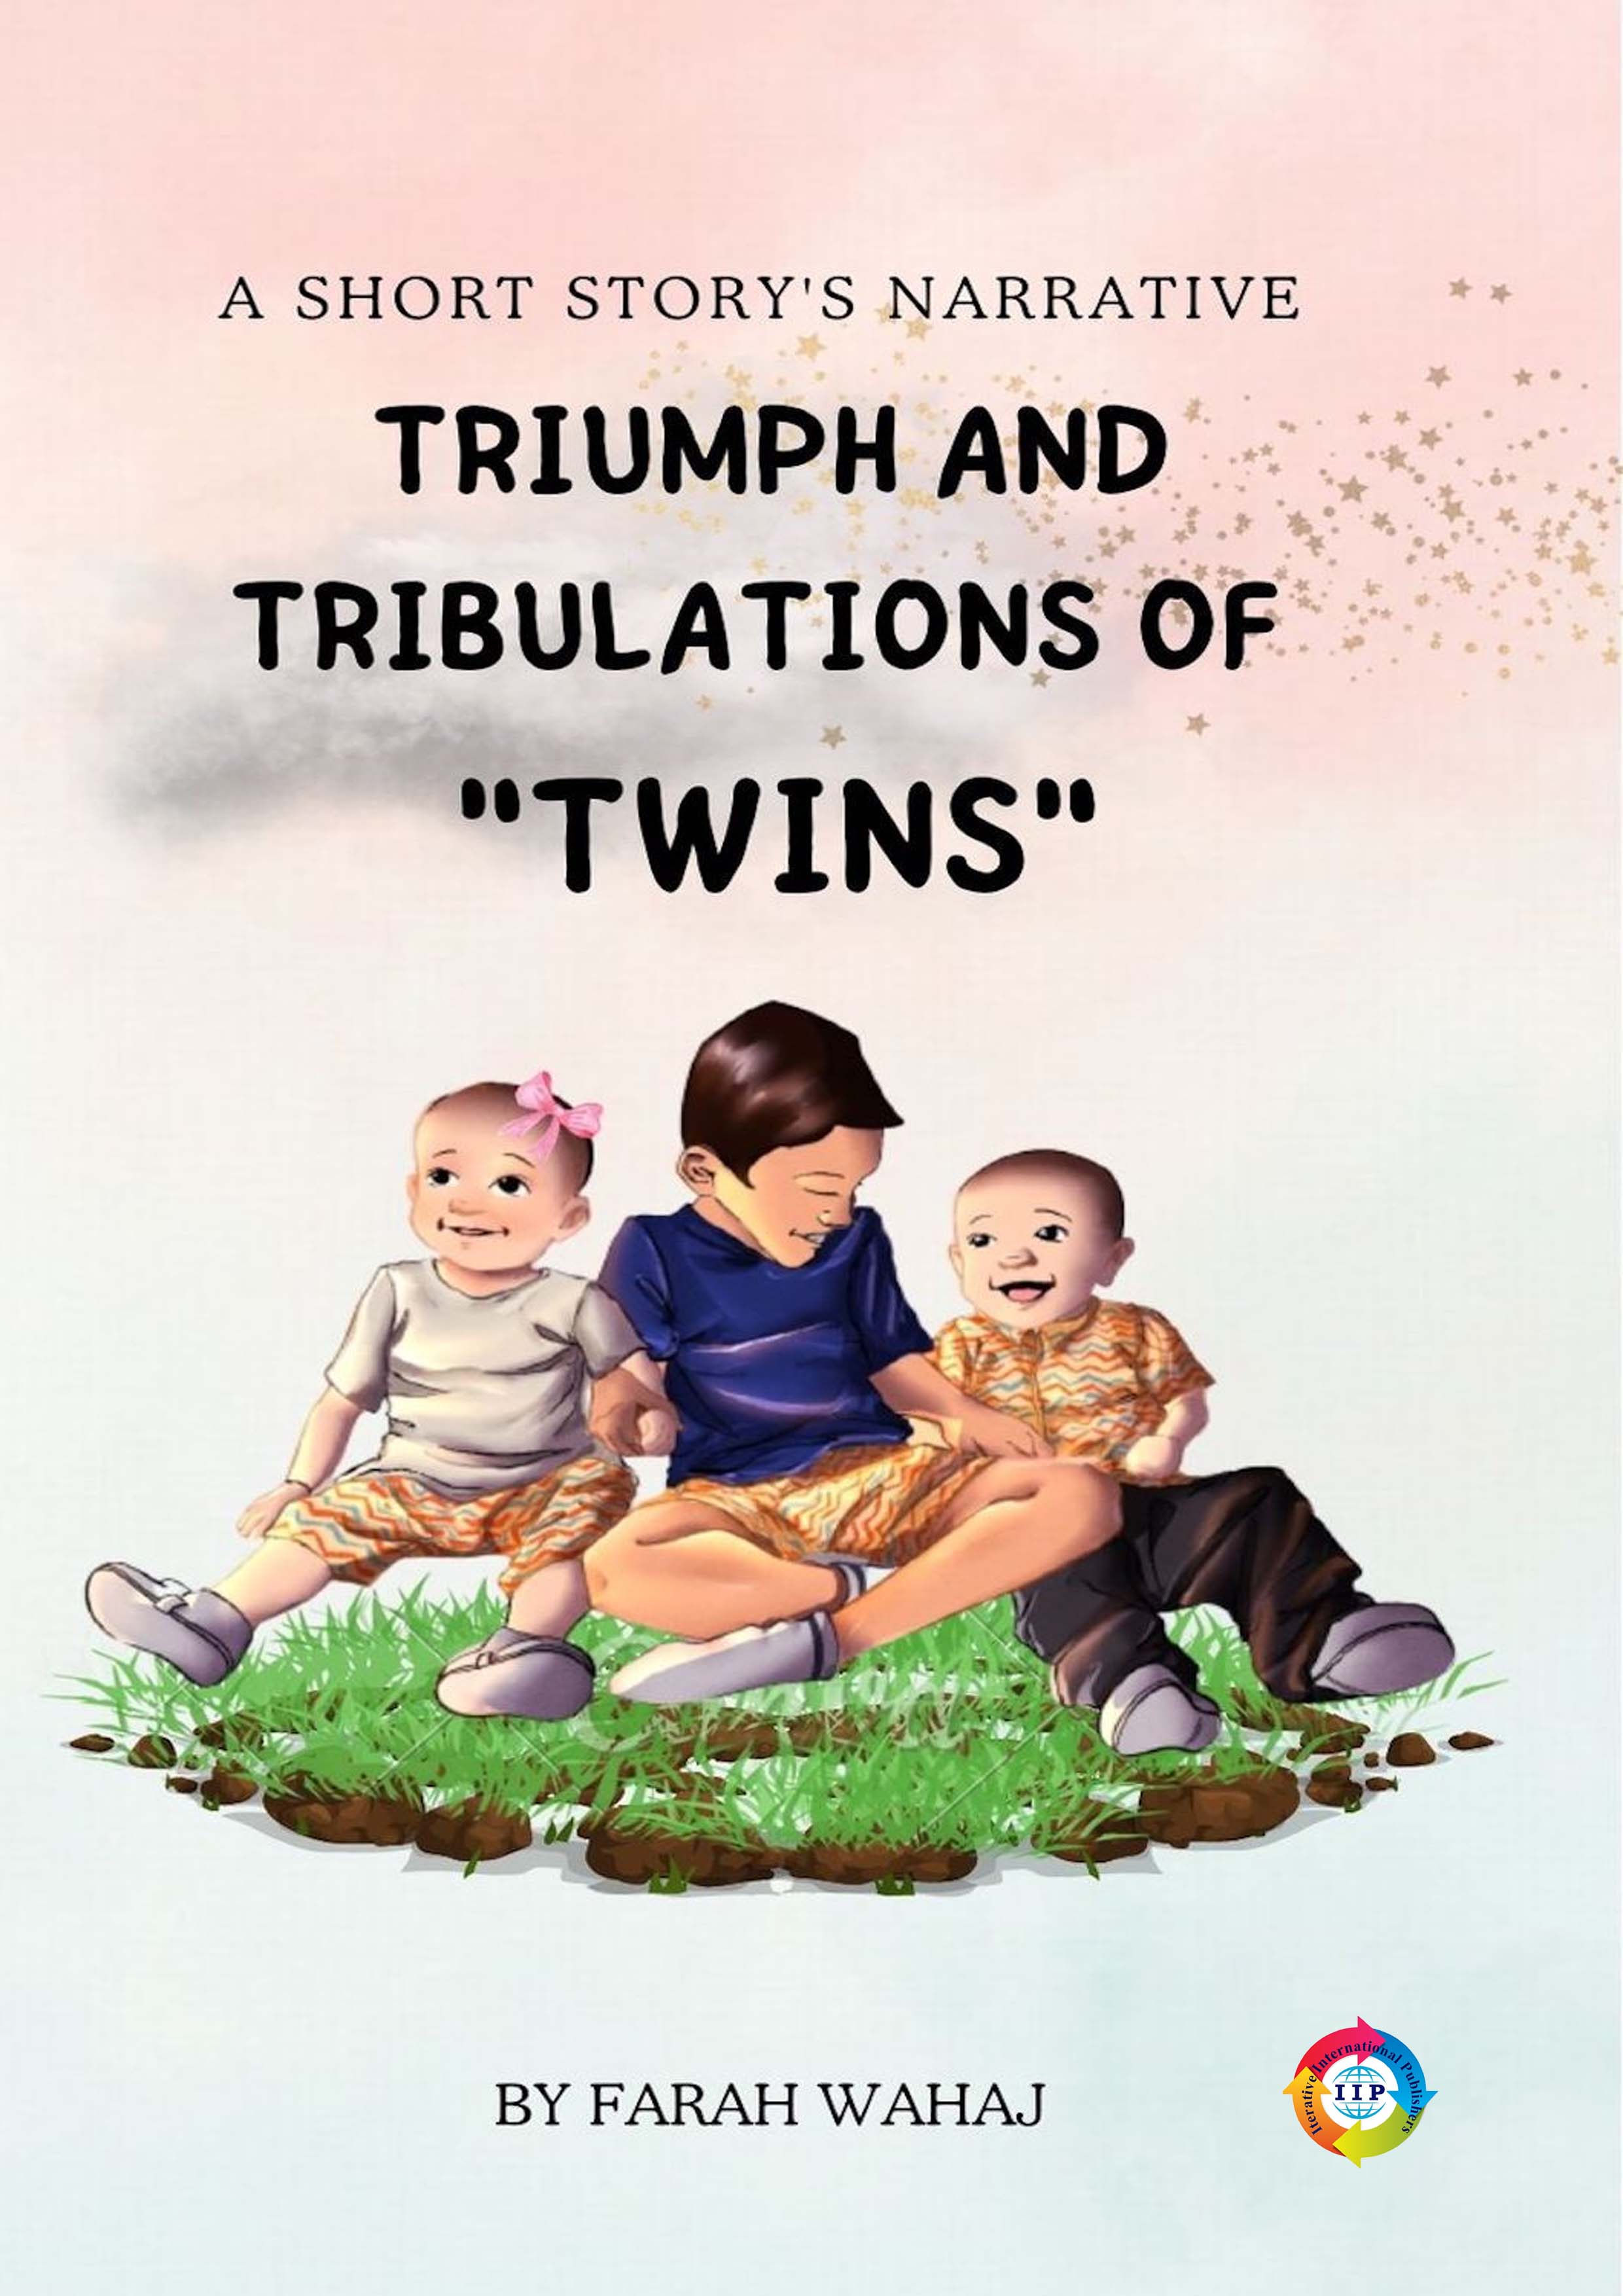 TRIUMPH AND TRIBULATIONS OF TWINS